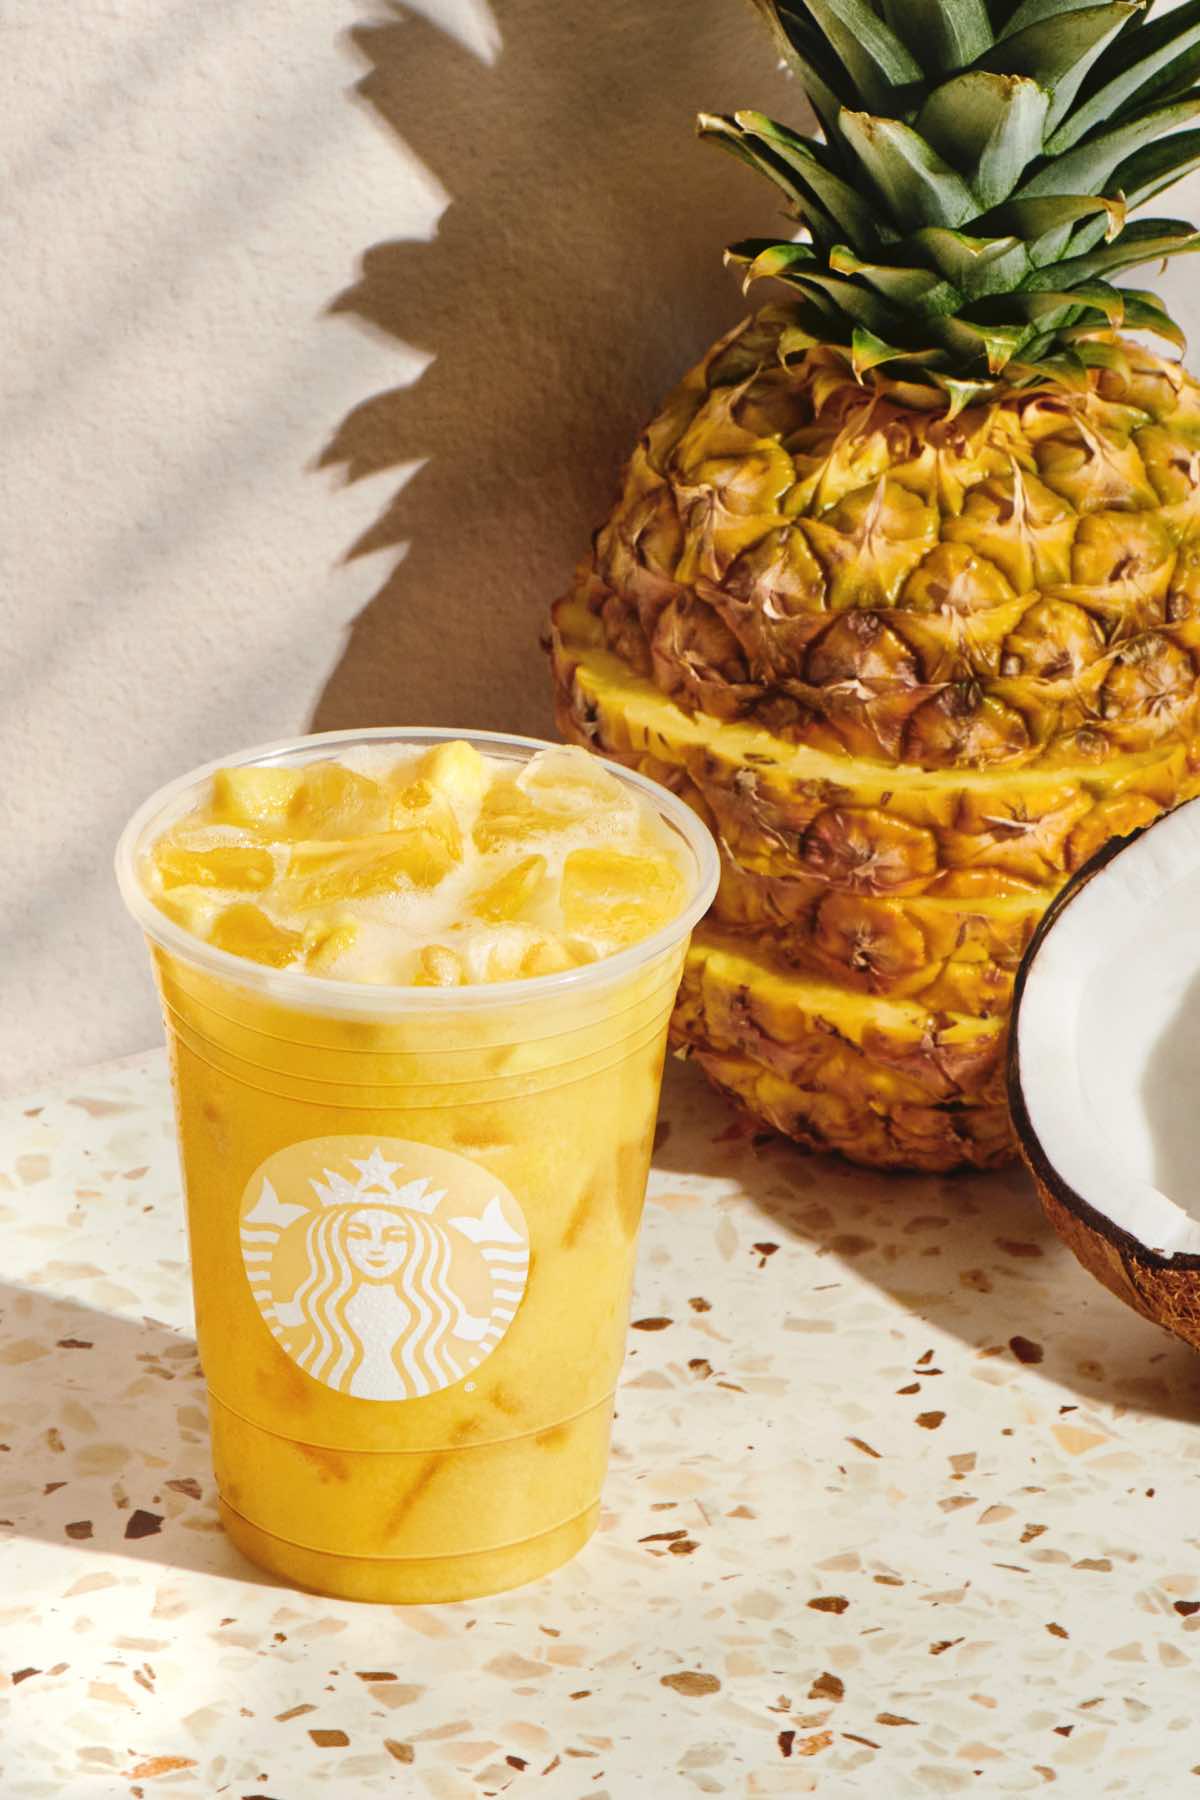 Starbucks New Drinks Pineapple Passionfruit Refreshers and Paradise